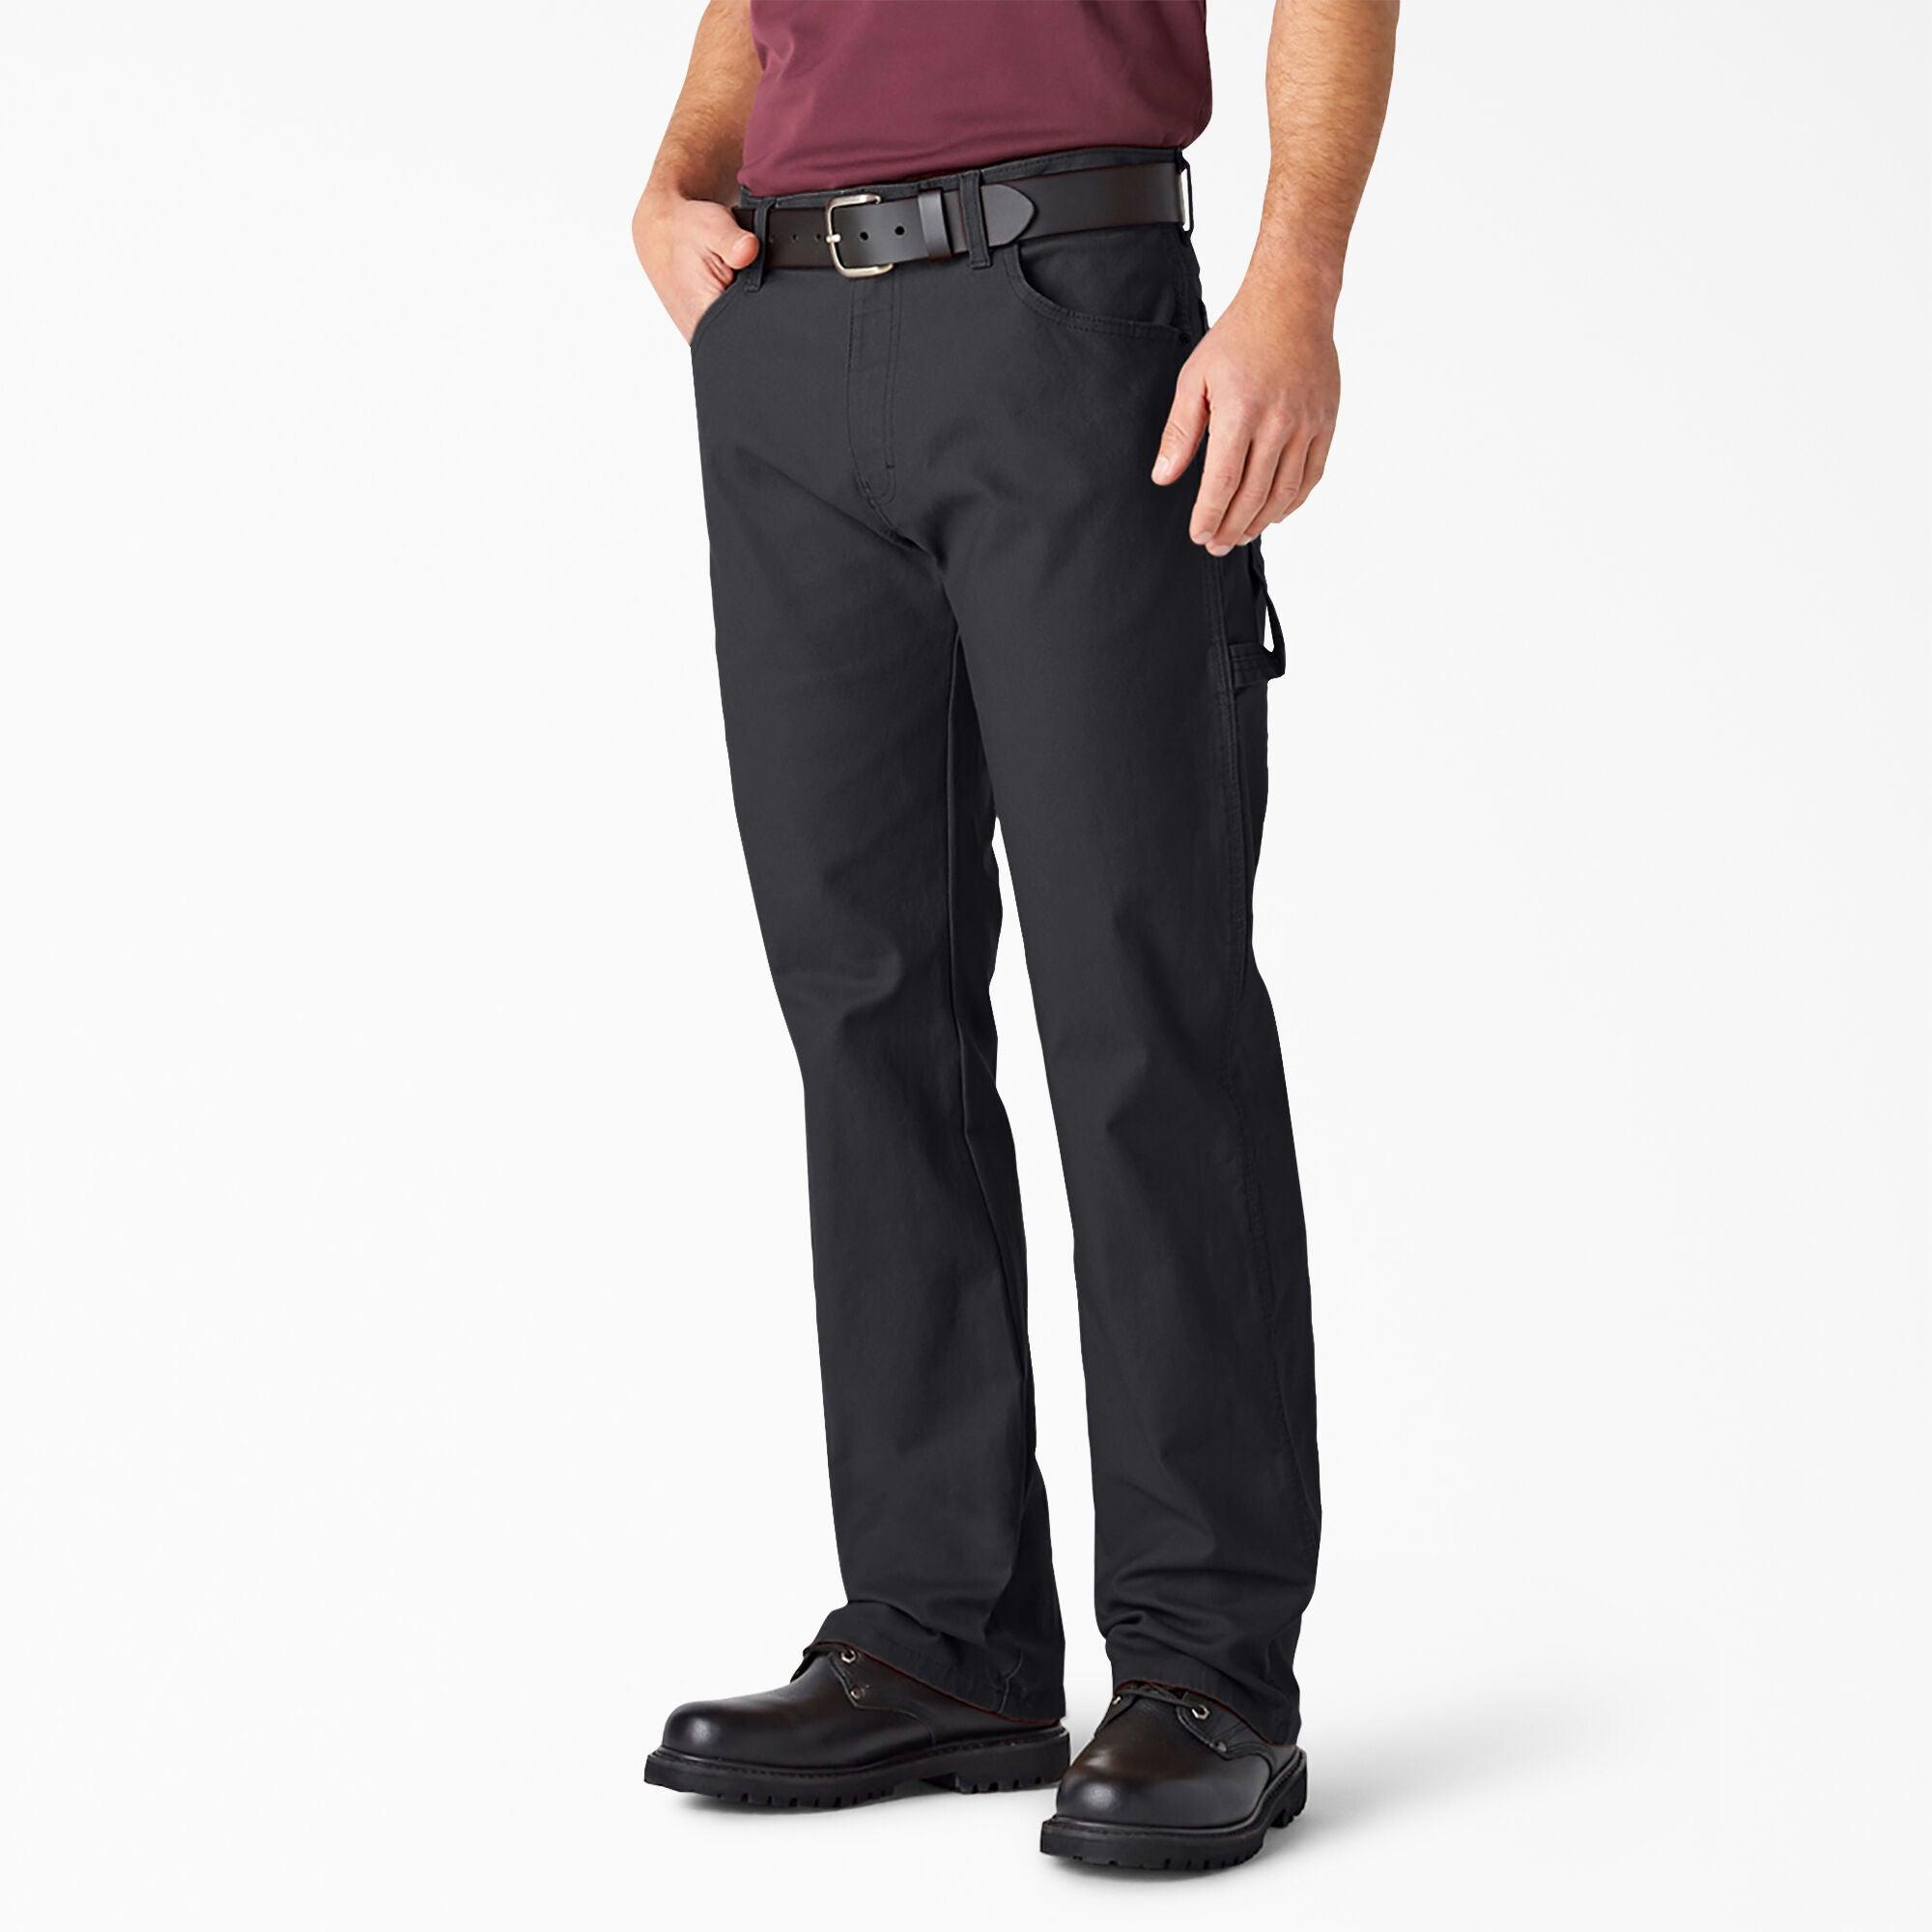 Relaxed Fit Heavyweight Duck Carpenter Pants, Black - Purpose-Built / Home of the Trades